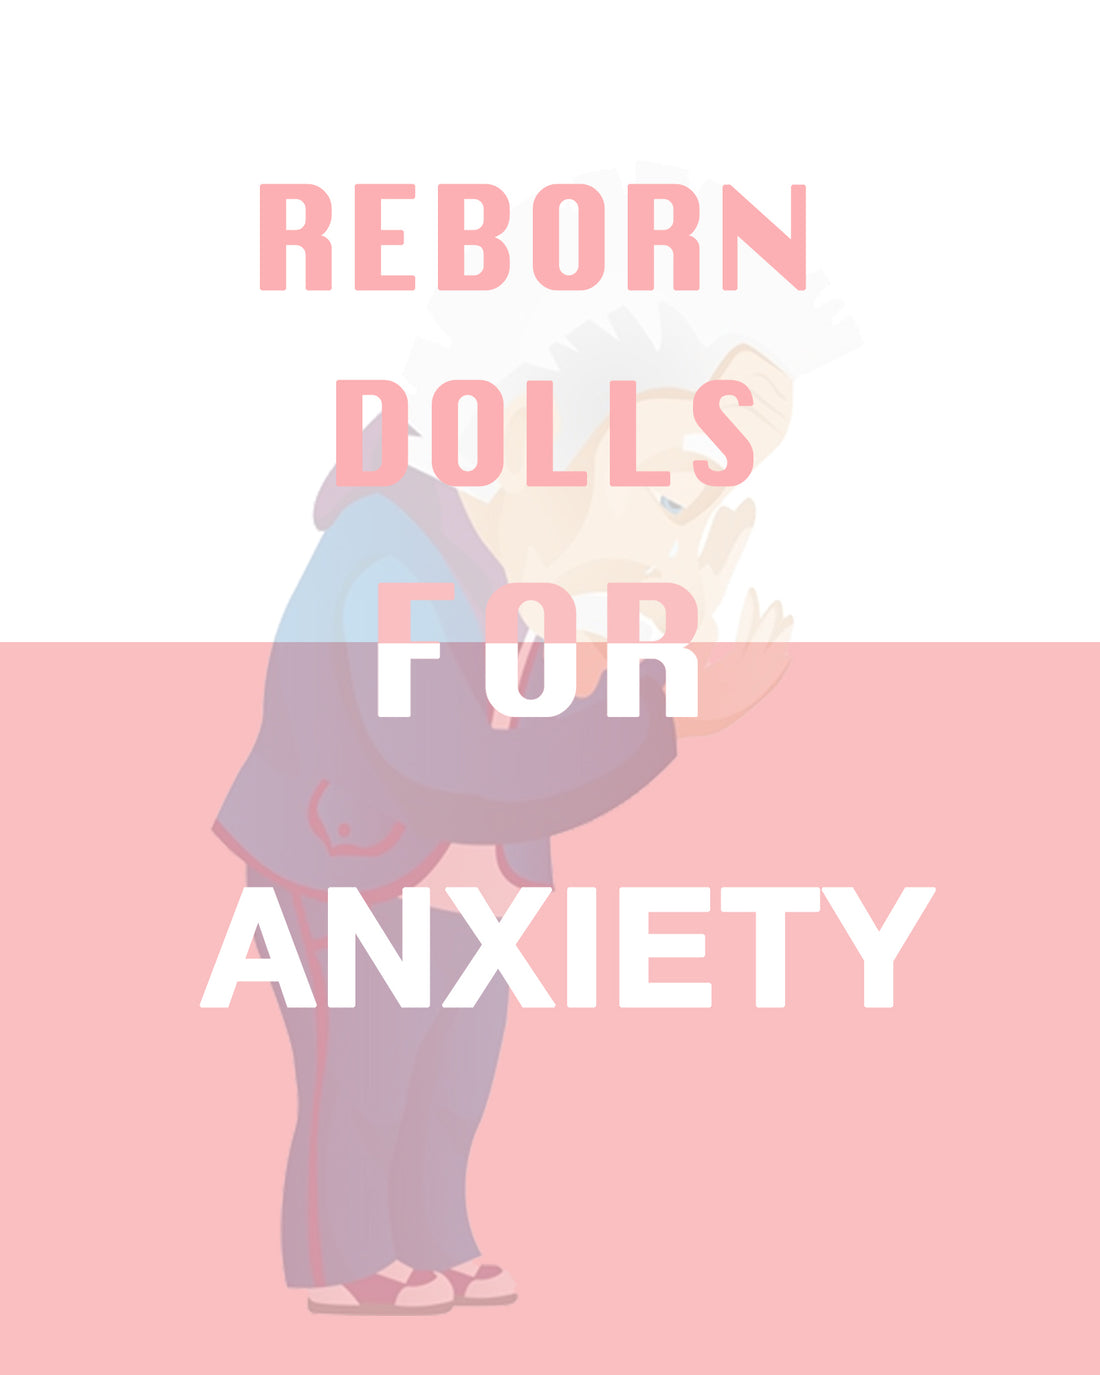 Reborn dolls for anxiety